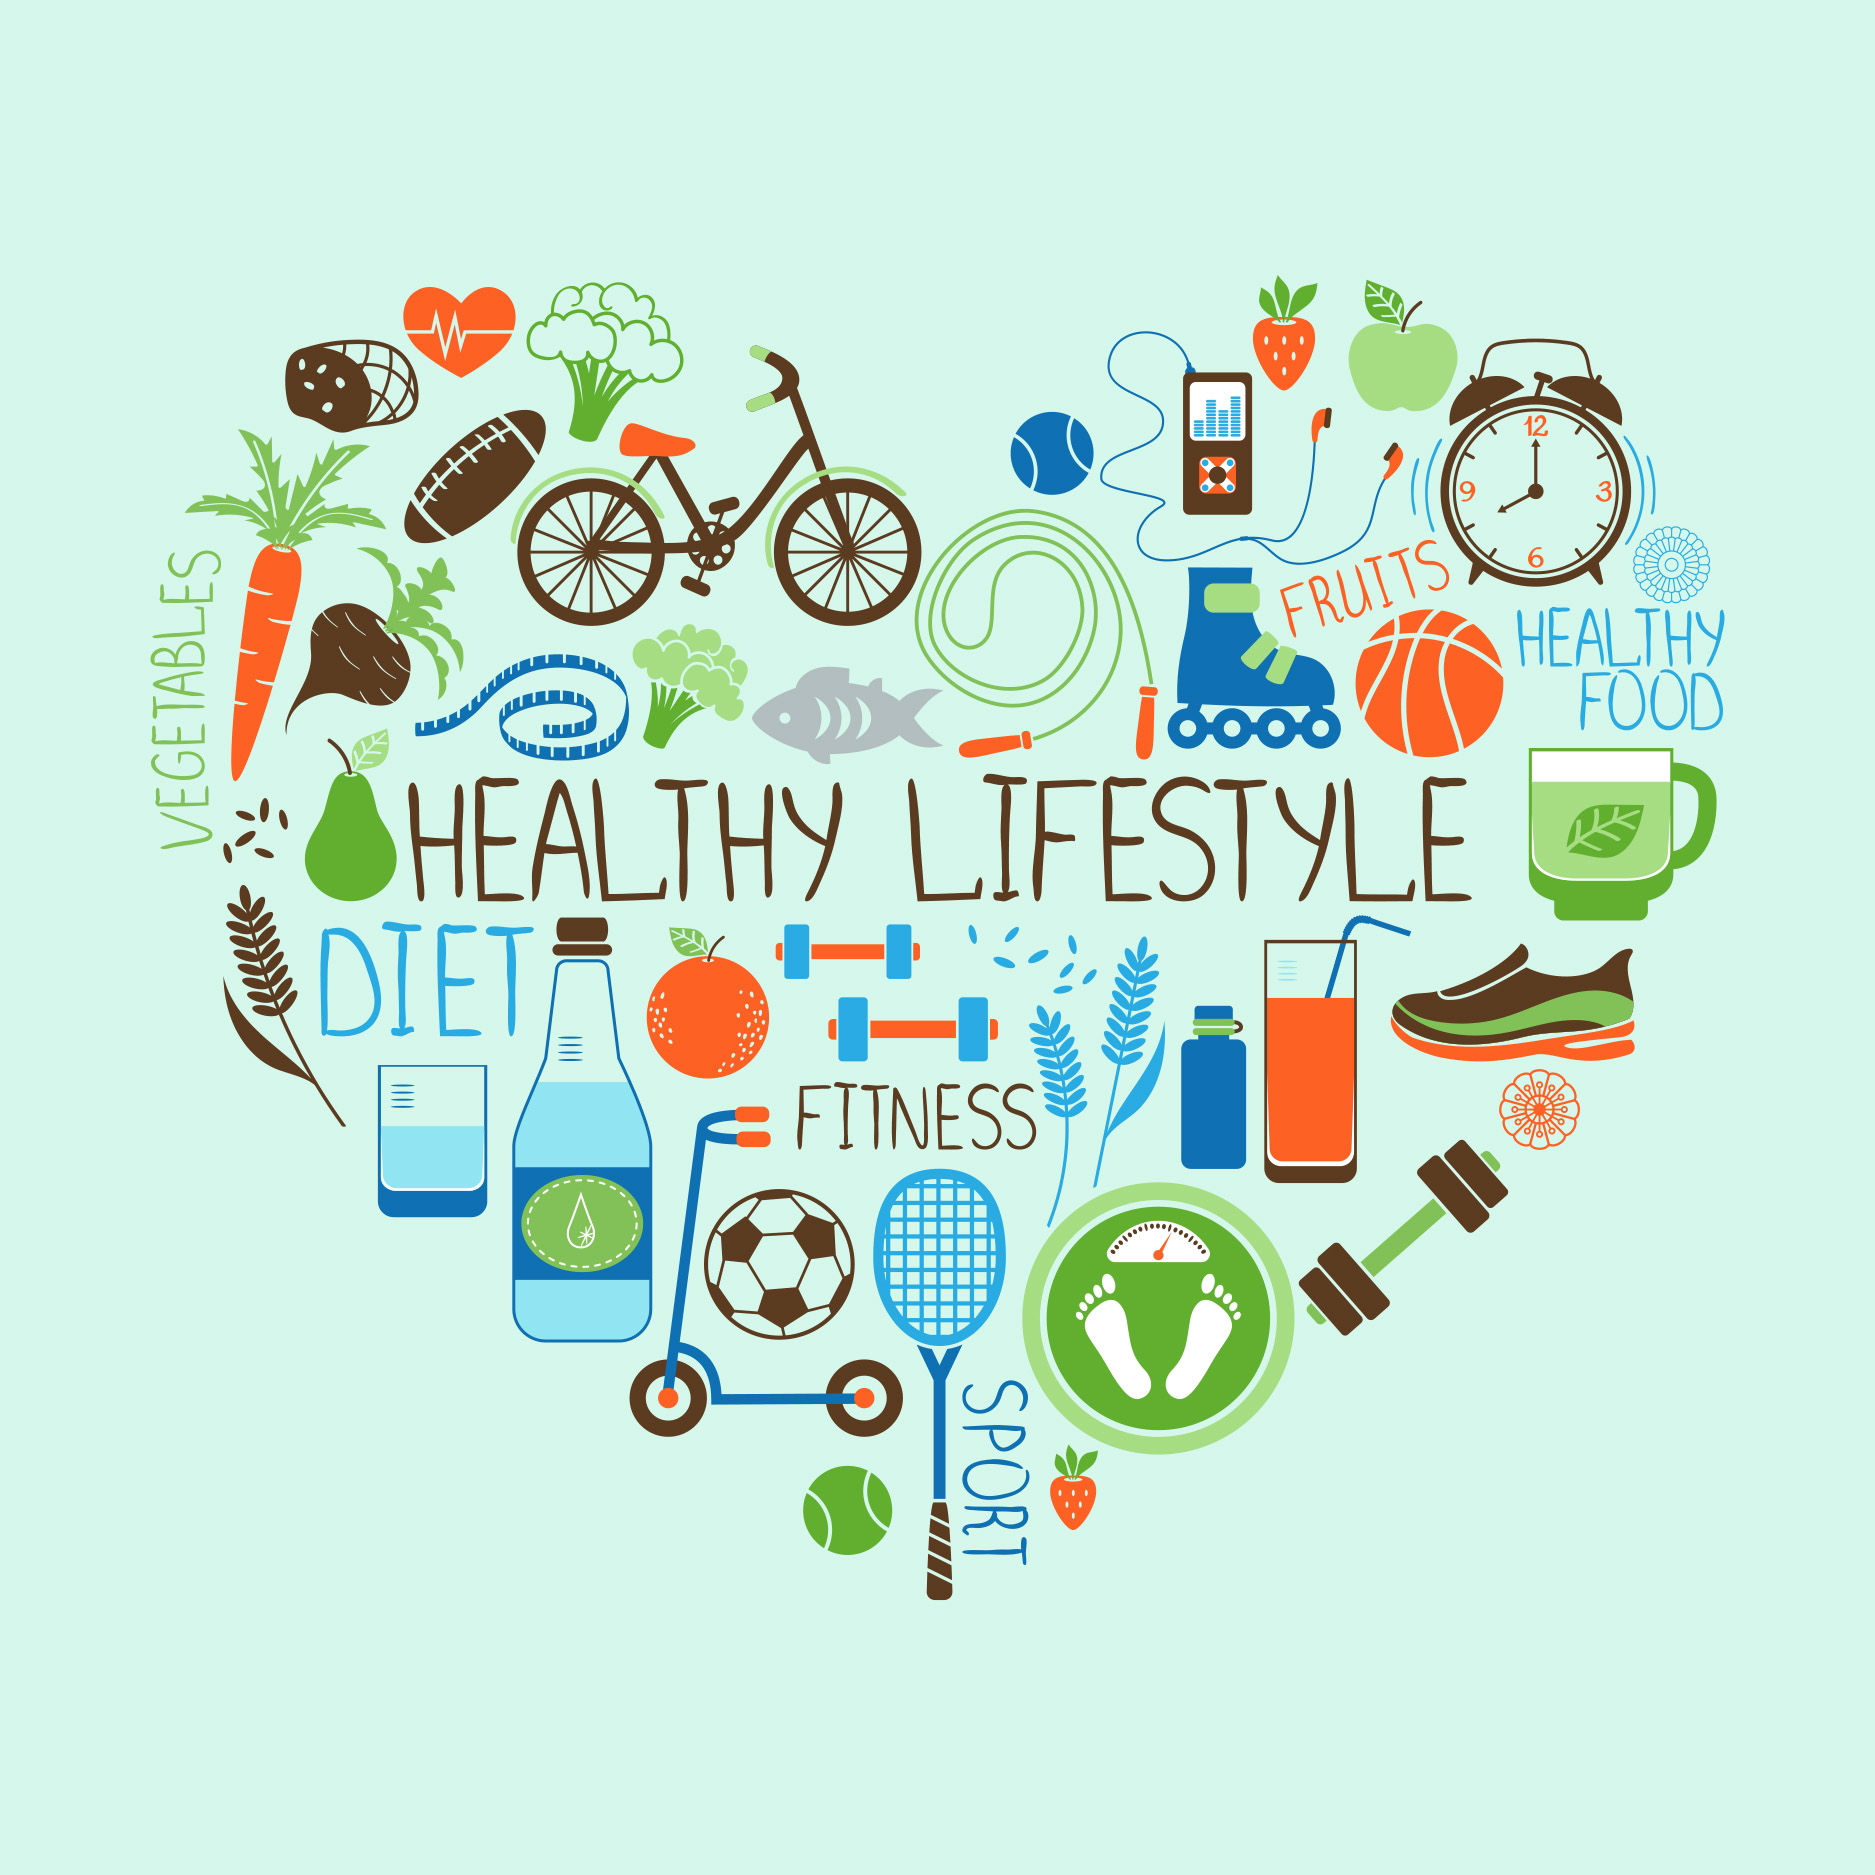 Your health and well-being – 